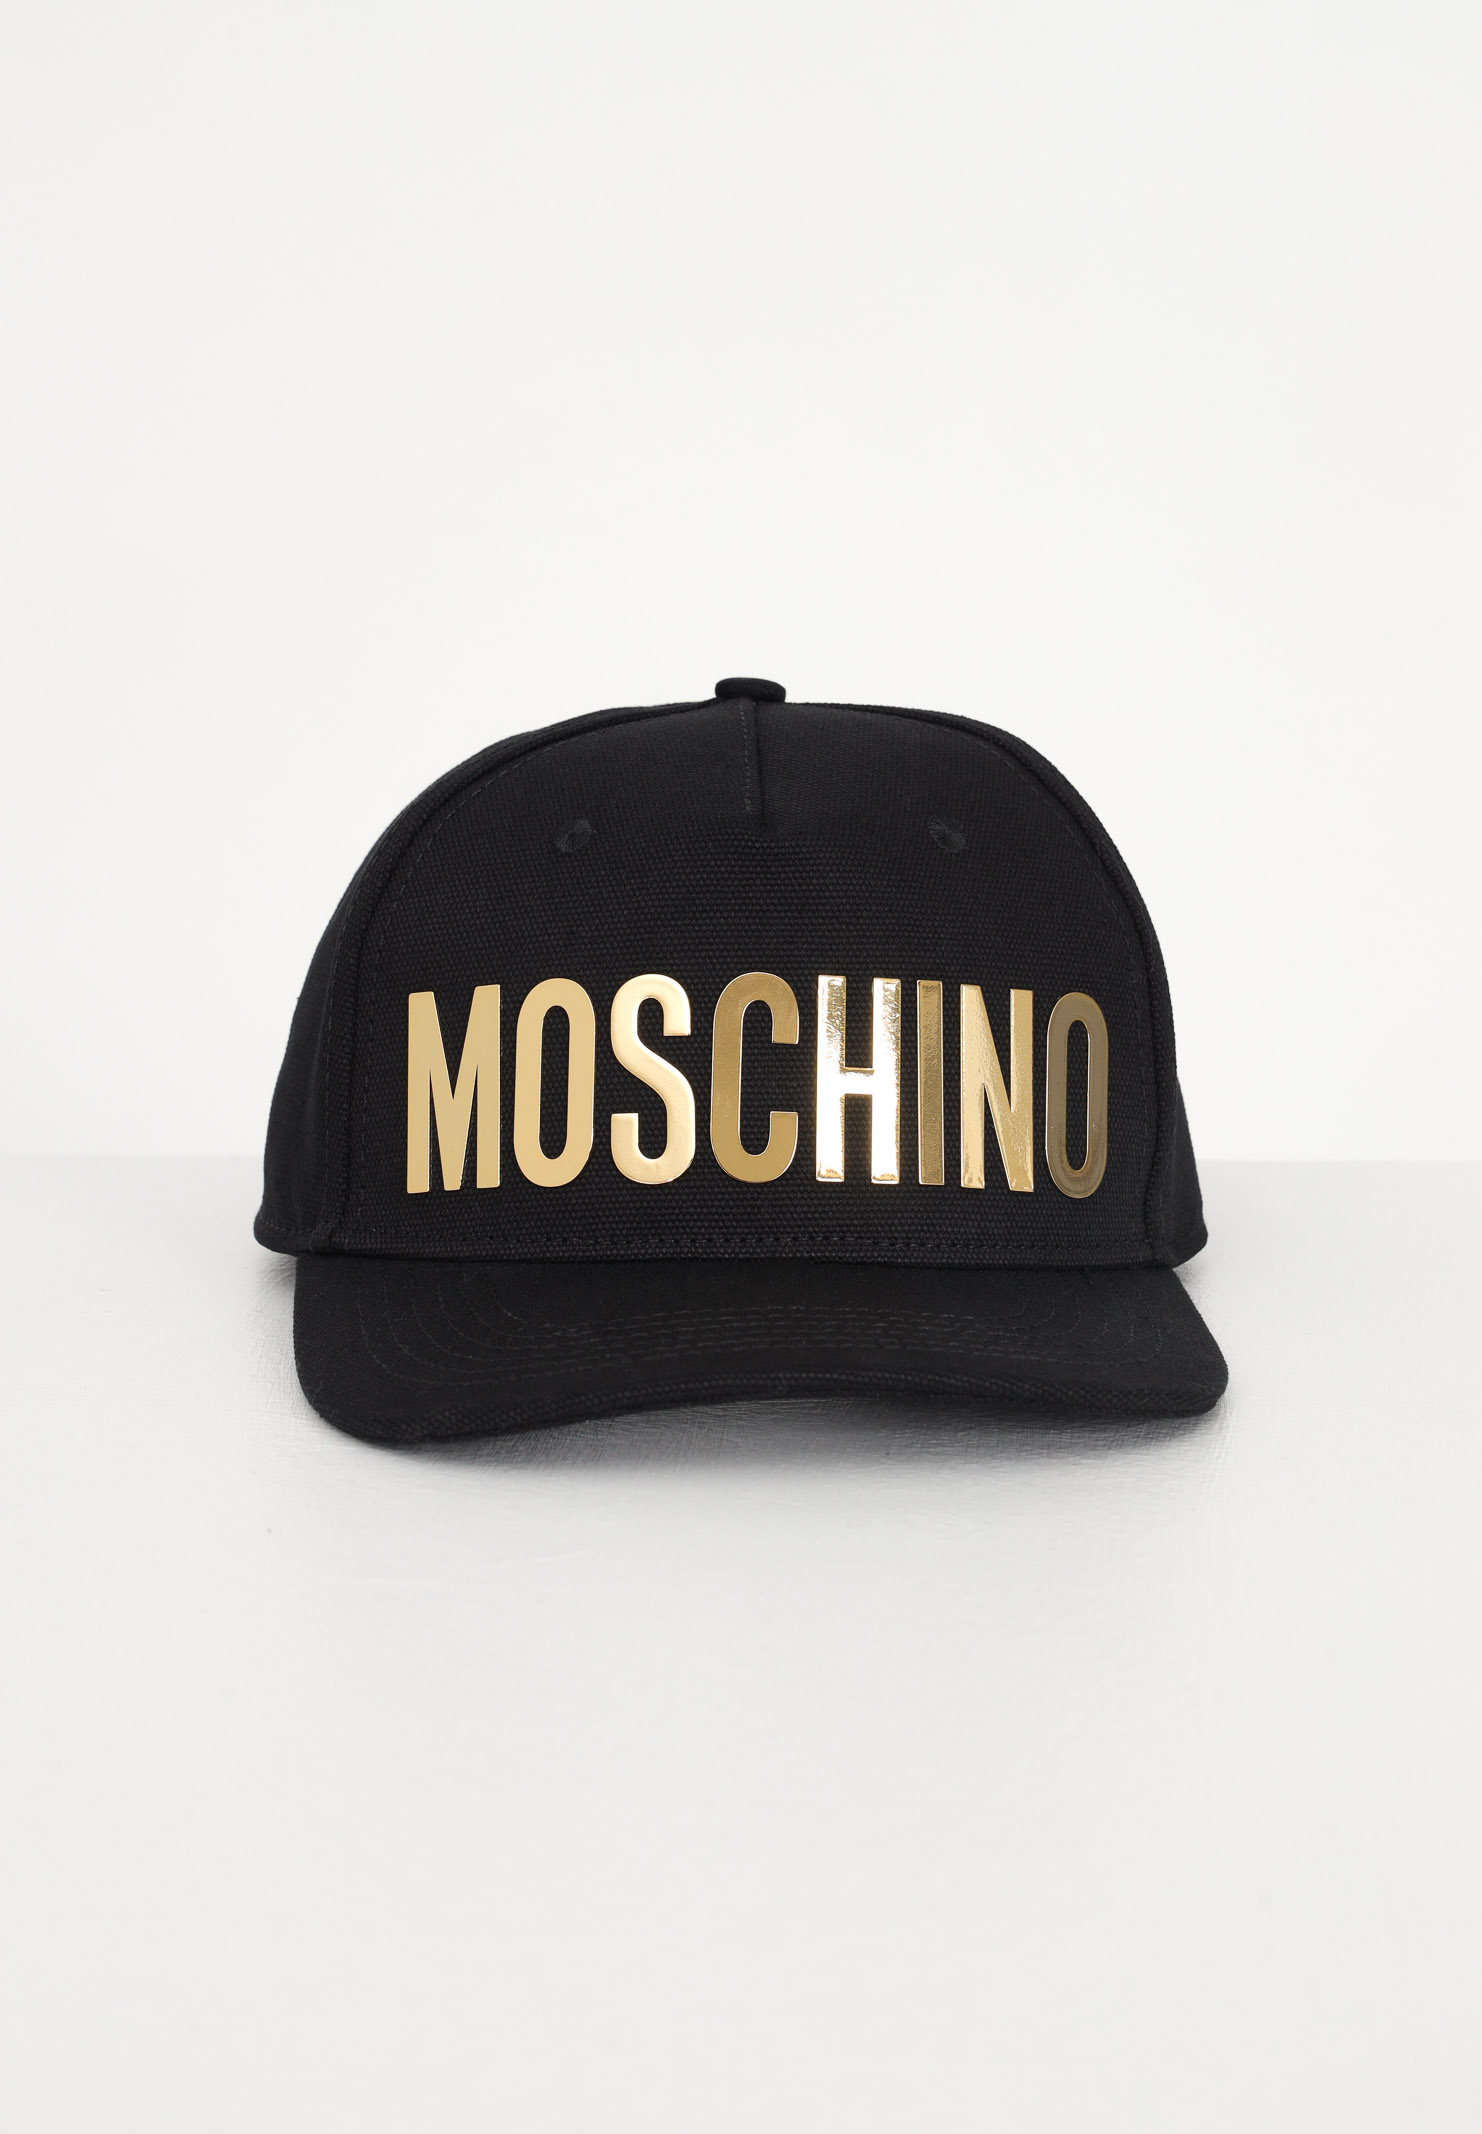 Men's black cap with plated metal lettering logo - MOSCHINO - Pavidas